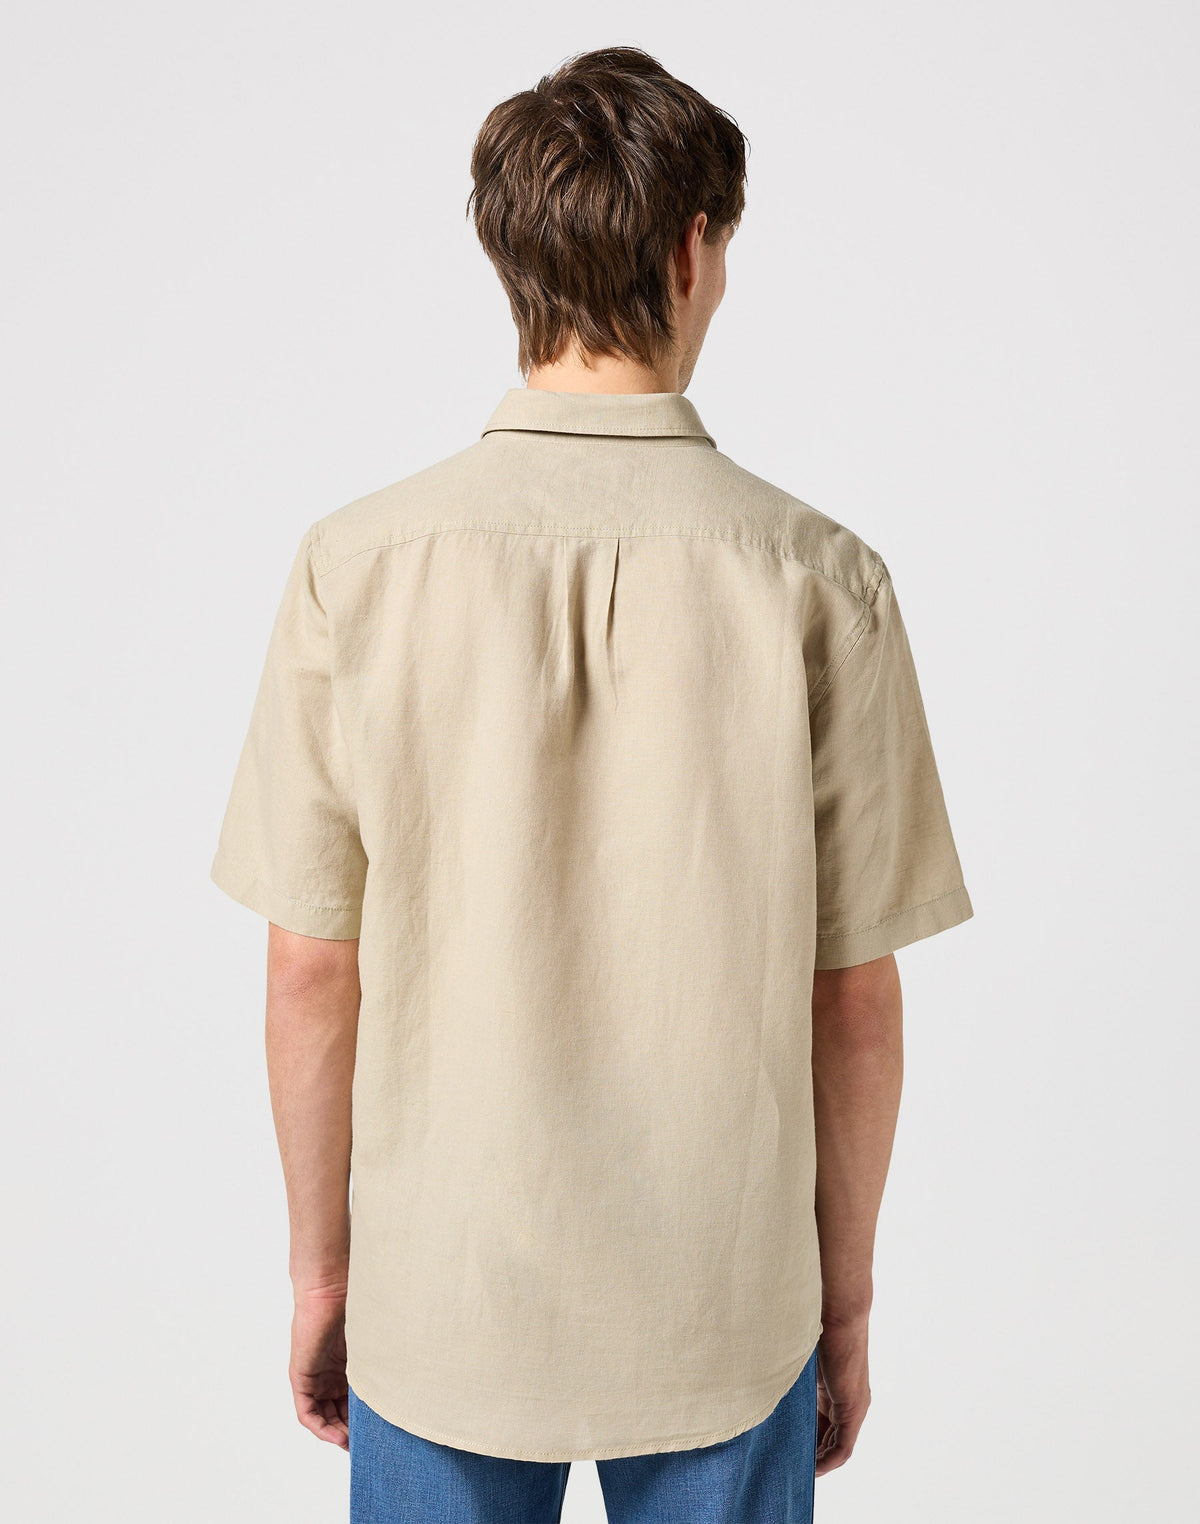 One Pocket Shirt in Plaza Taupe